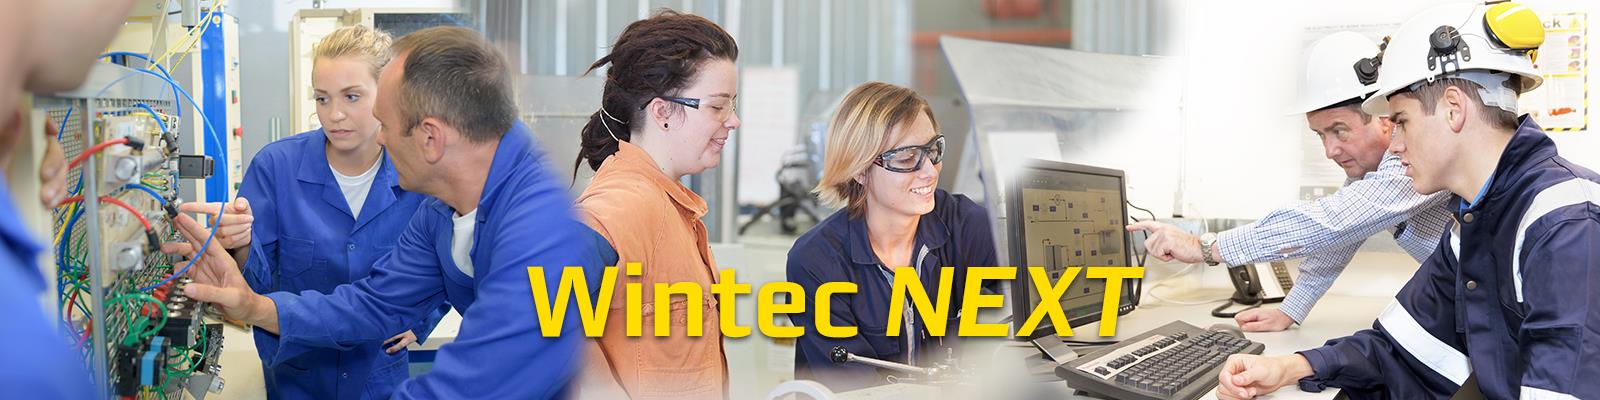 Wintec Next Banner showing trades and engineering students